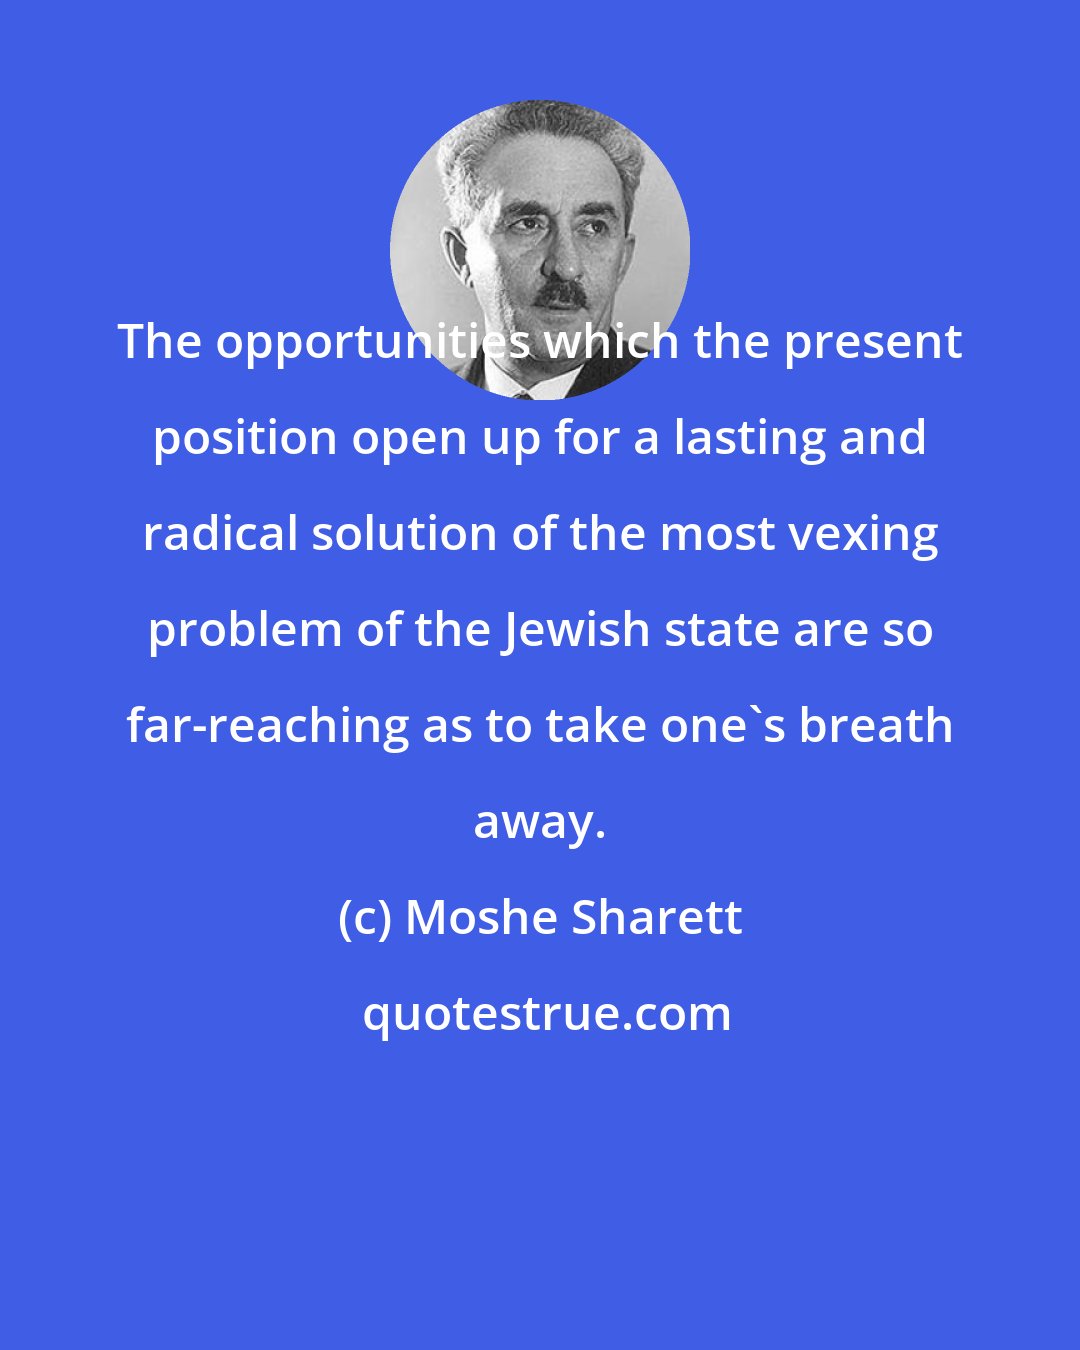 Moshe Sharett: The opportunities which the present position open up for a lasting and radical solution of the most vexing problem of the Jewish state are so far-reaching as to take one's breath away.